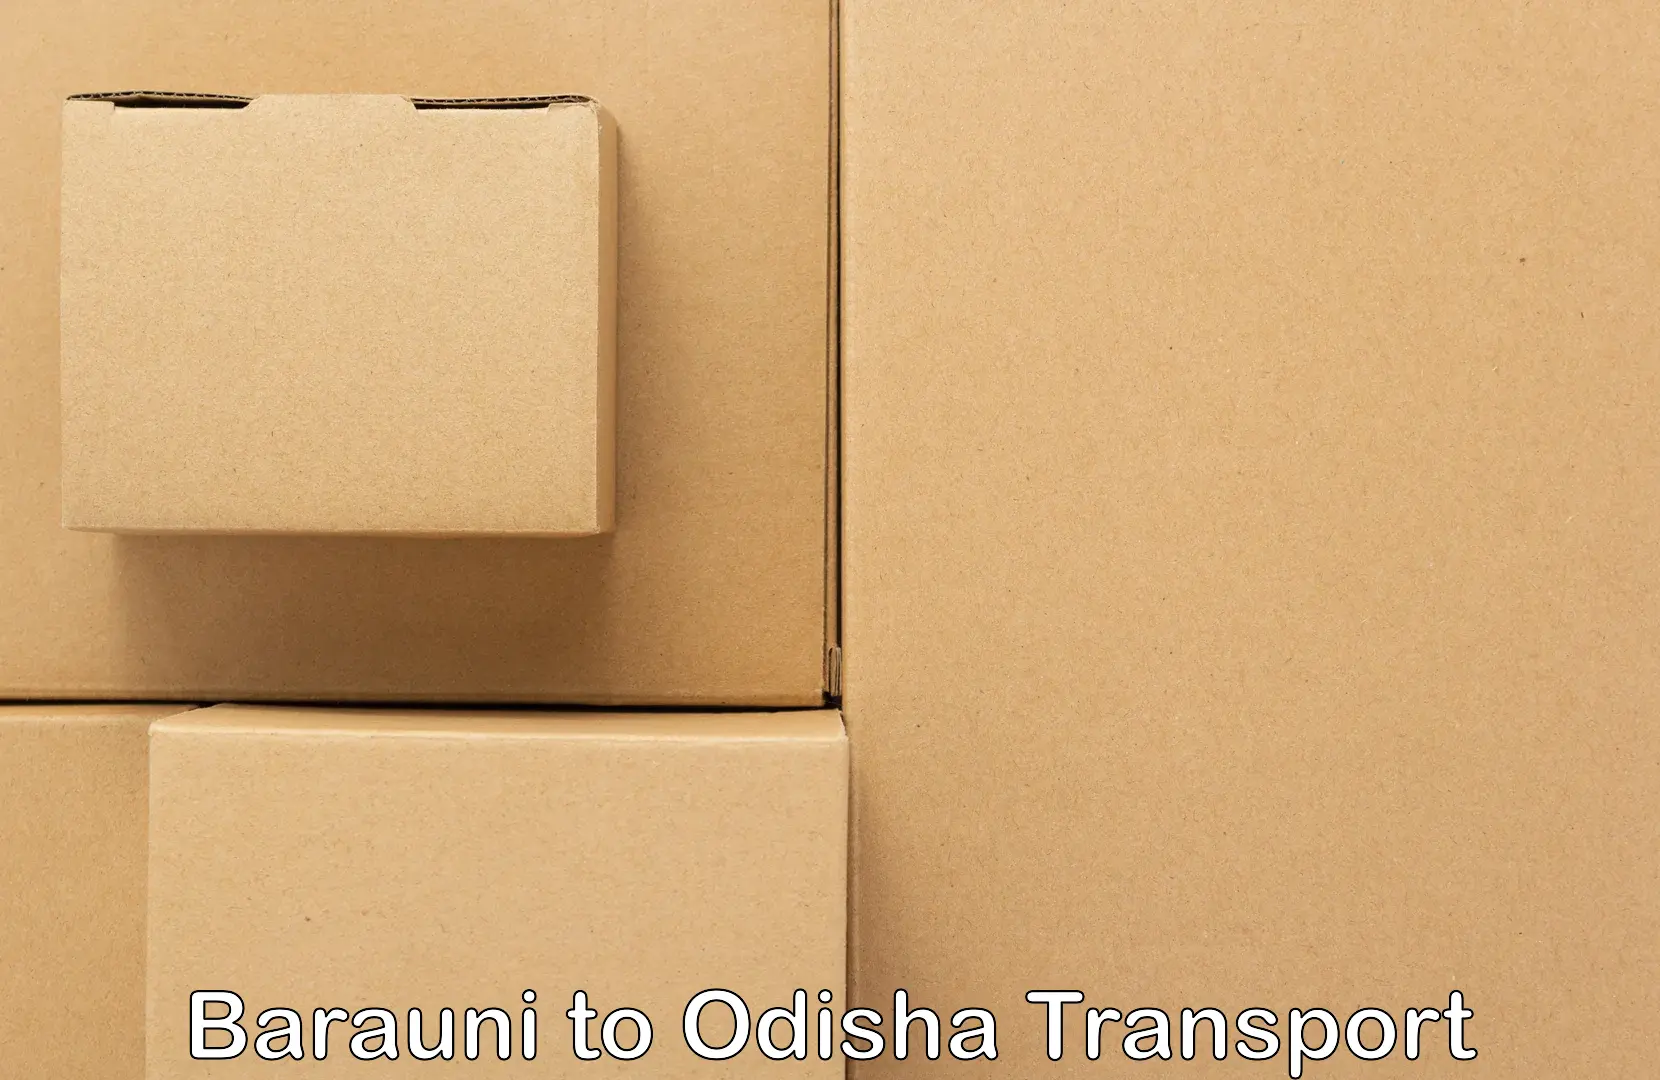 Truck transport companies in India Barauni to Chatrapur